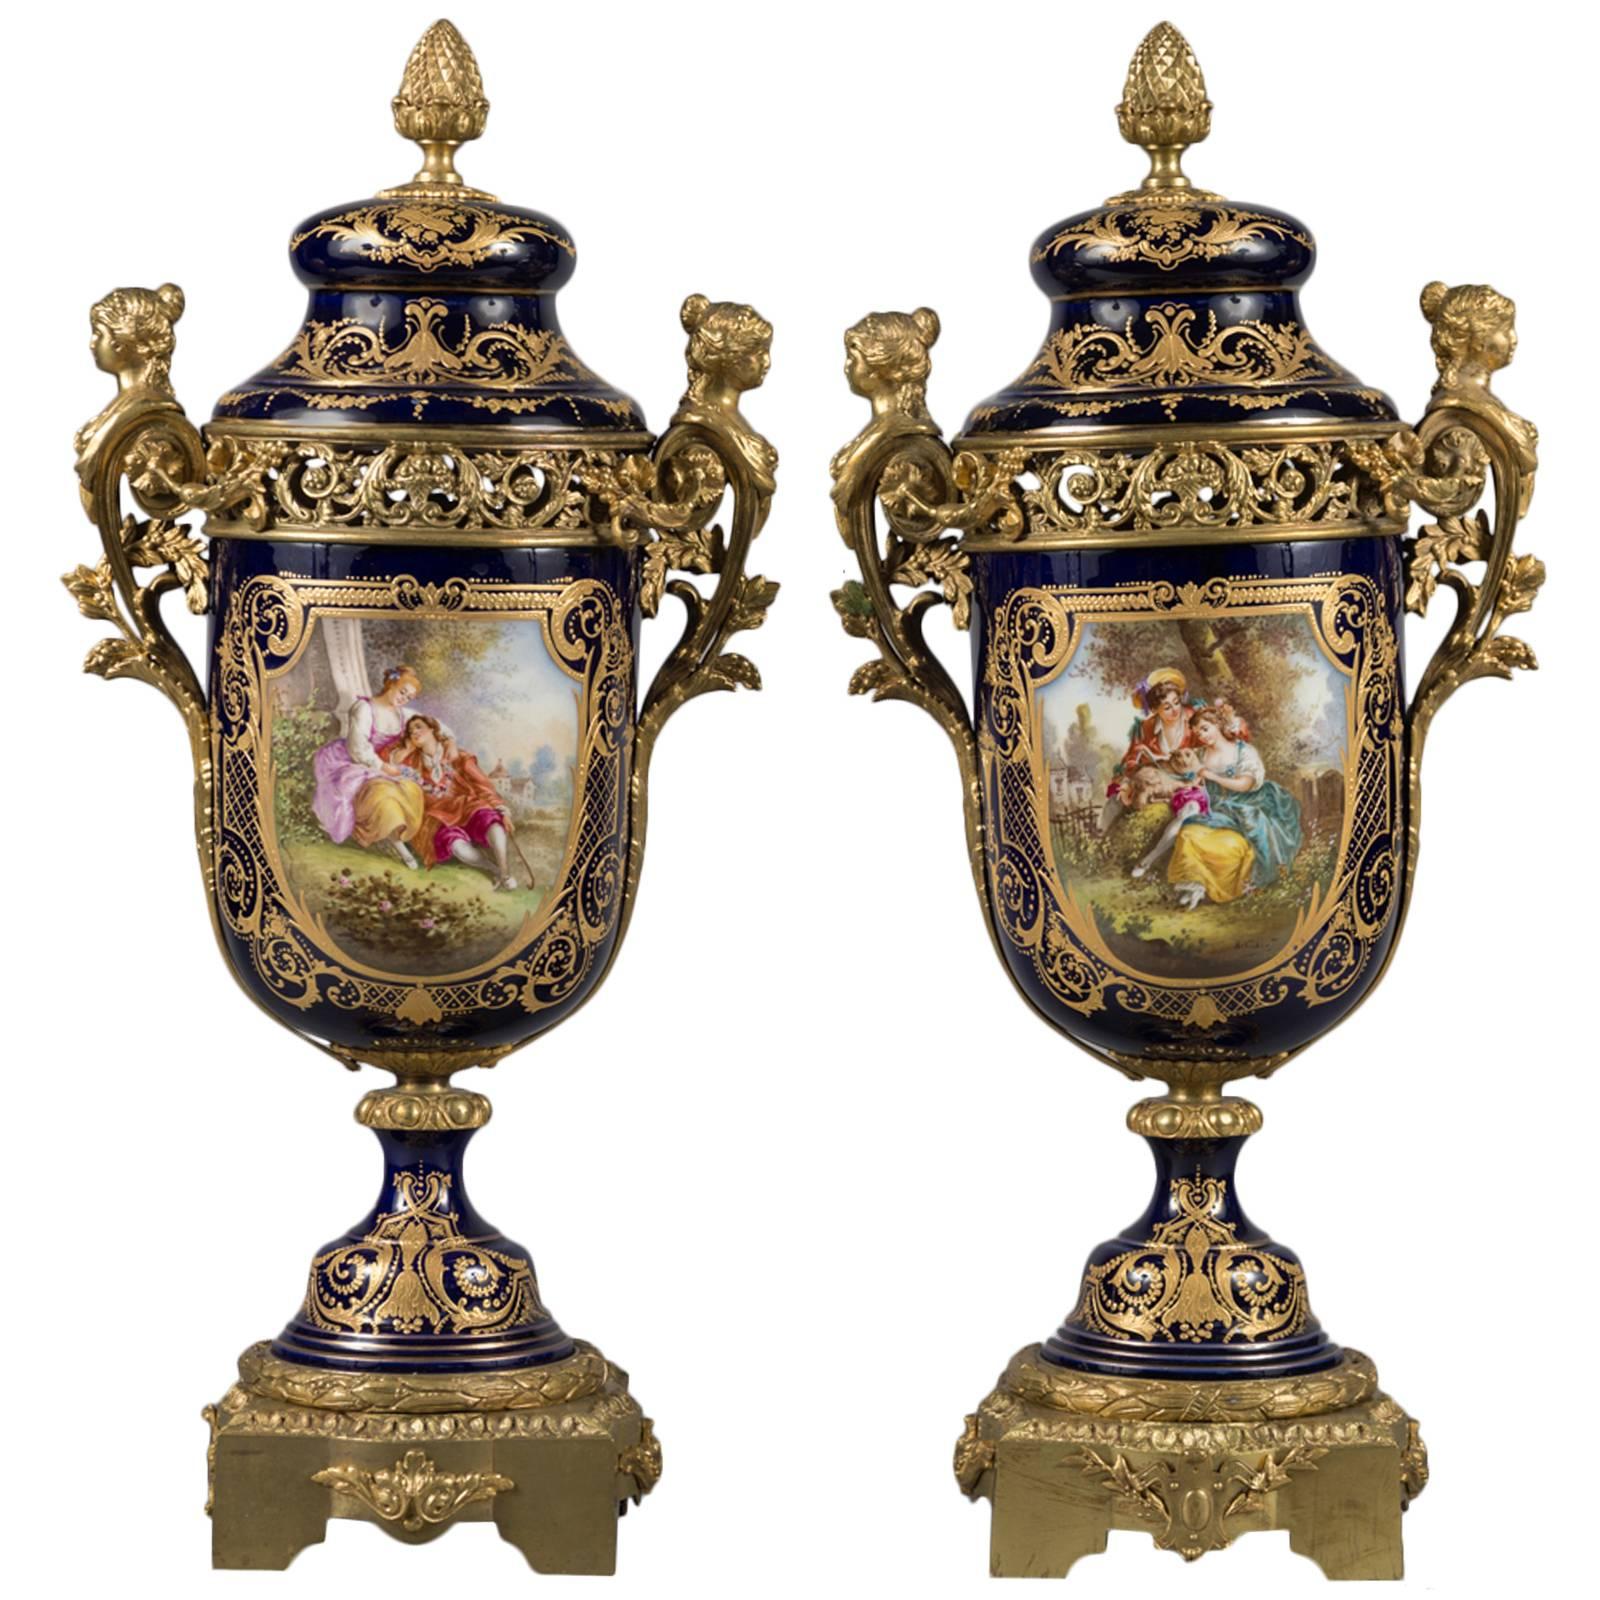 Pair of 19th Century French Sevres Gilt Bronze-Mounted Cobalt Blue Lidded Urns